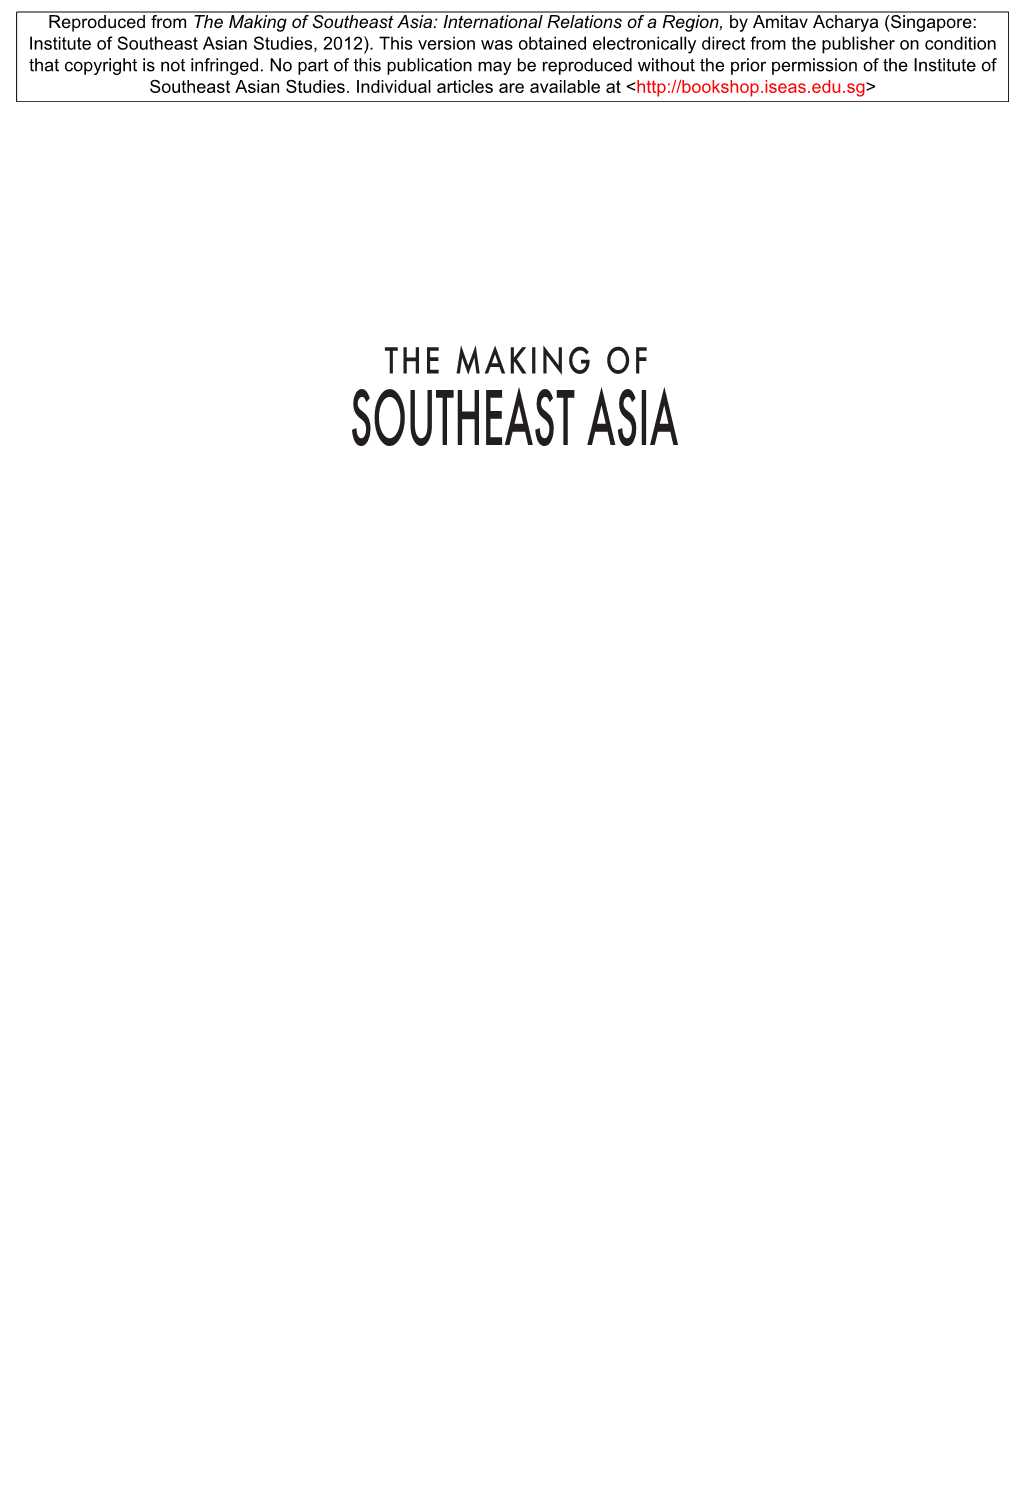 Reproduced from the Making of Southeast Asia